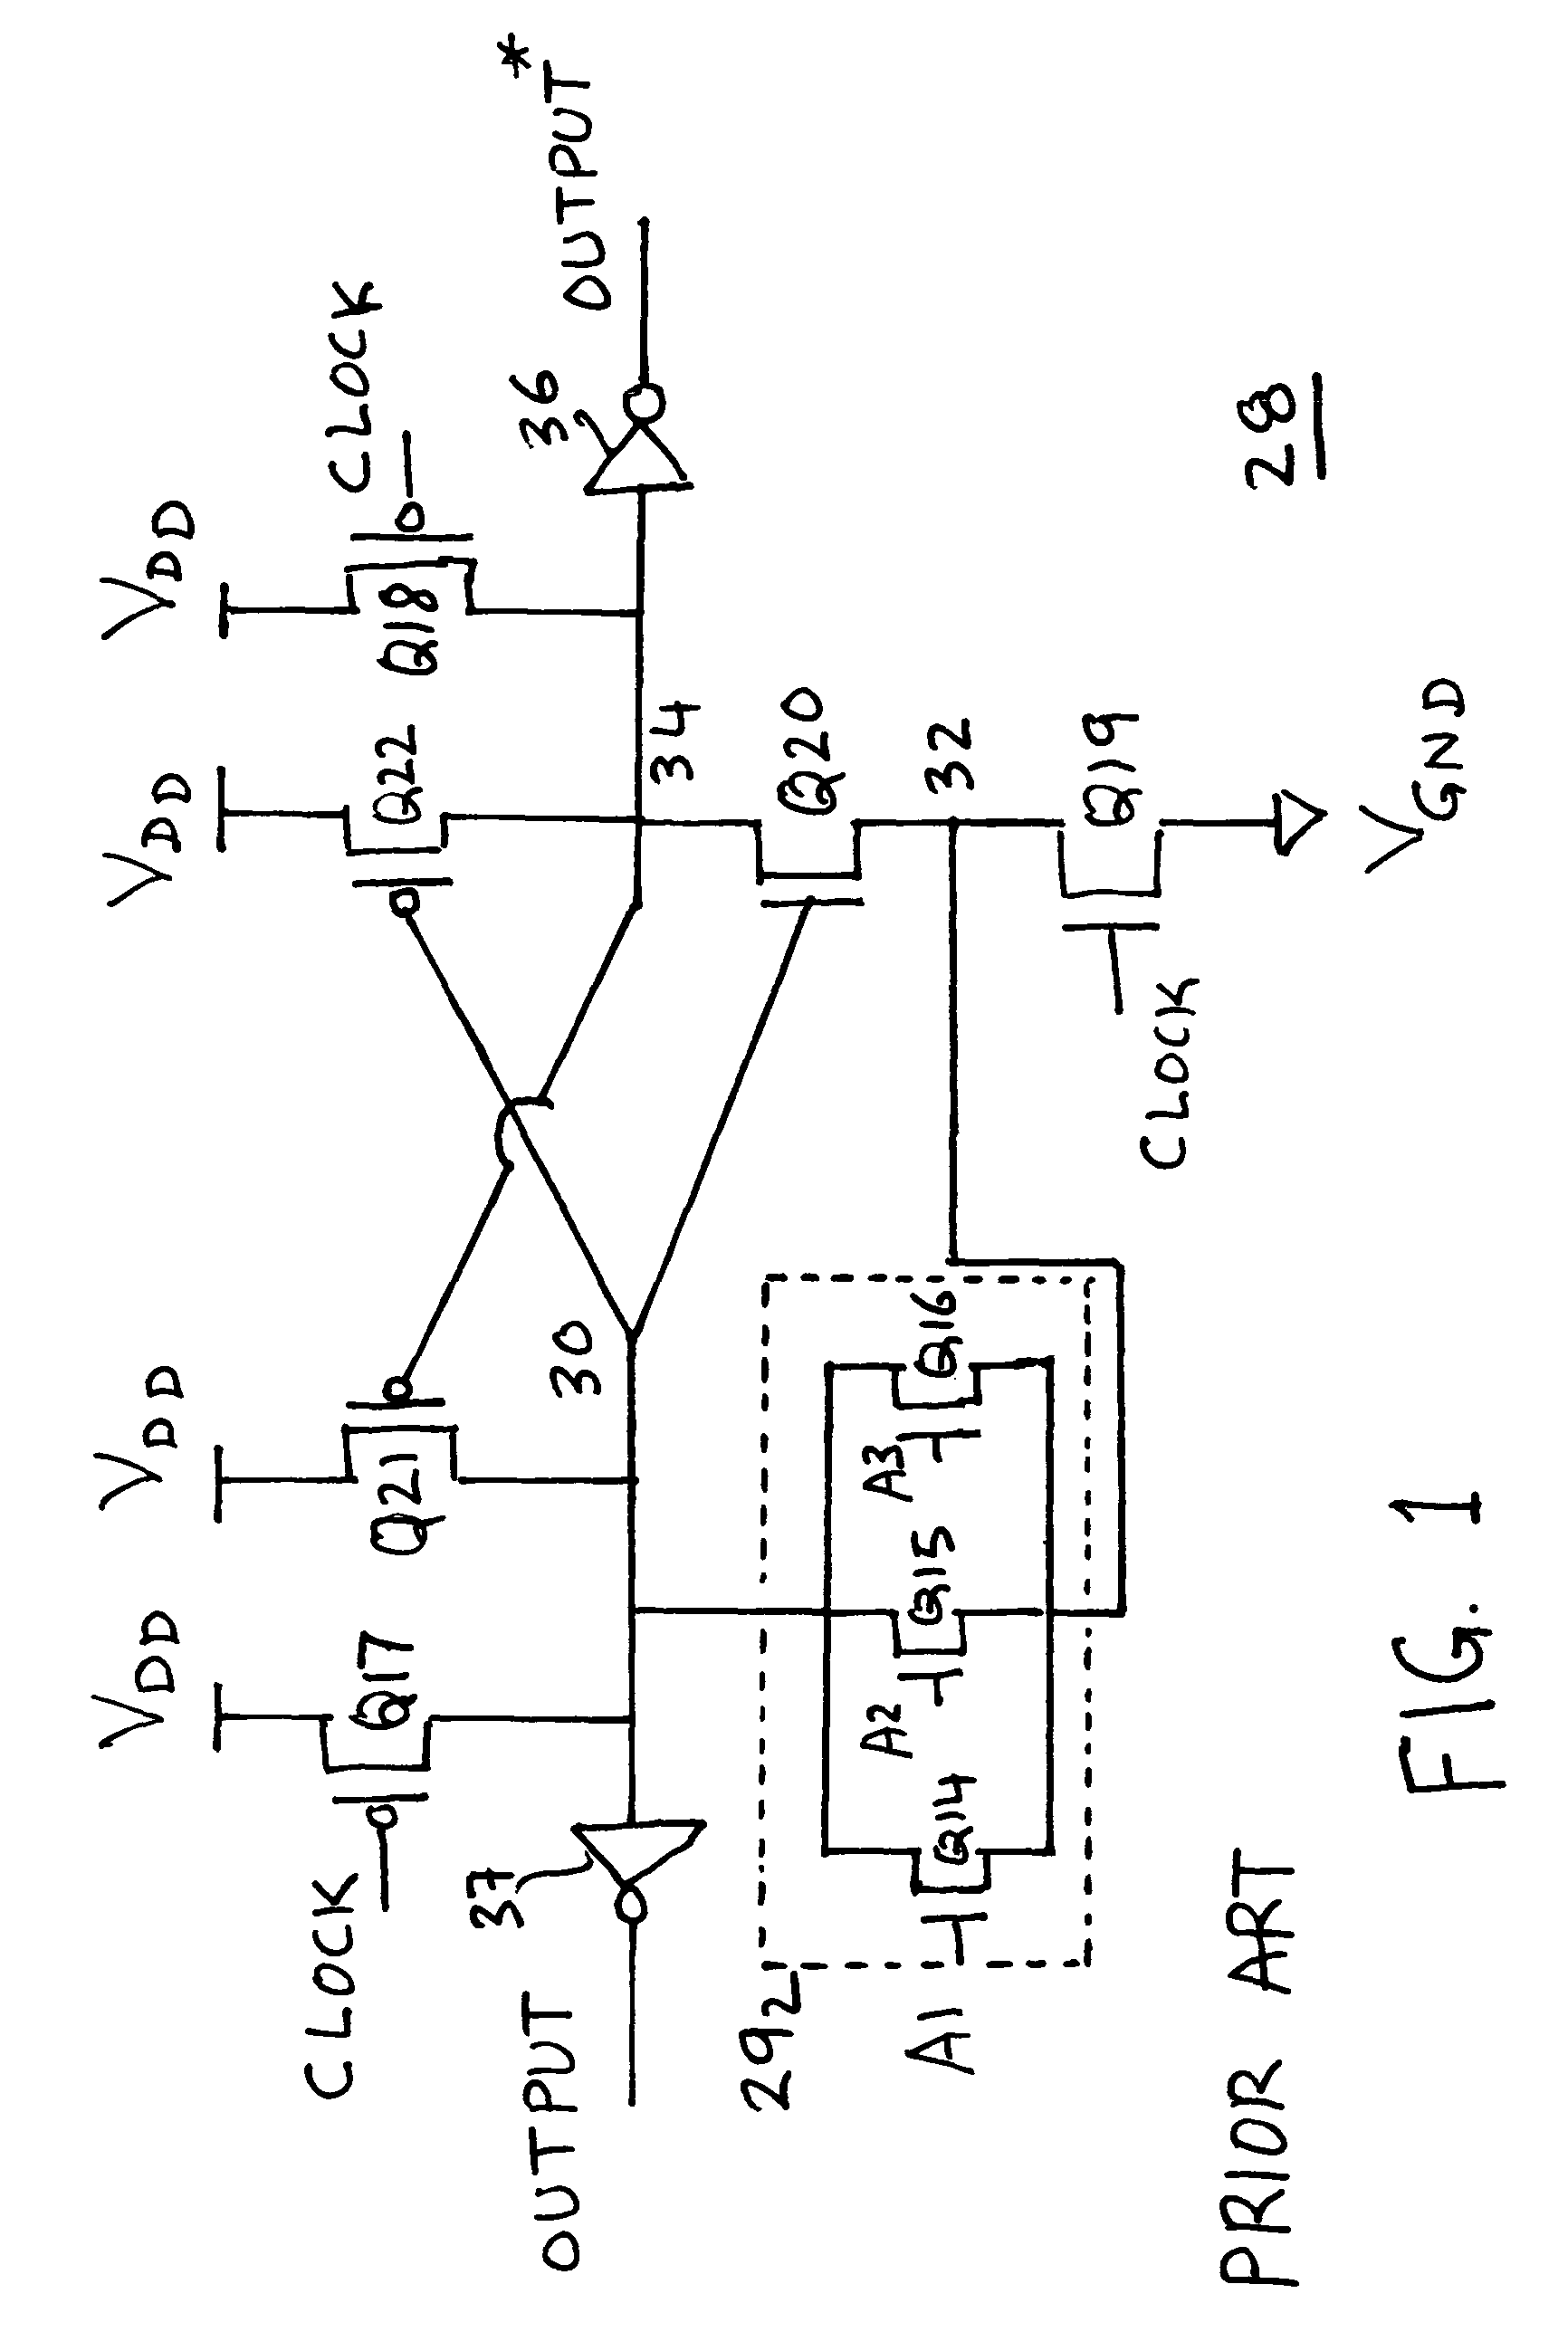 Reduced glitch dynamic logic circuit and method of synthesis for complementary oxide semiconductor (CMOS) and strained/unstrained silicon-on-insulator (SOI)